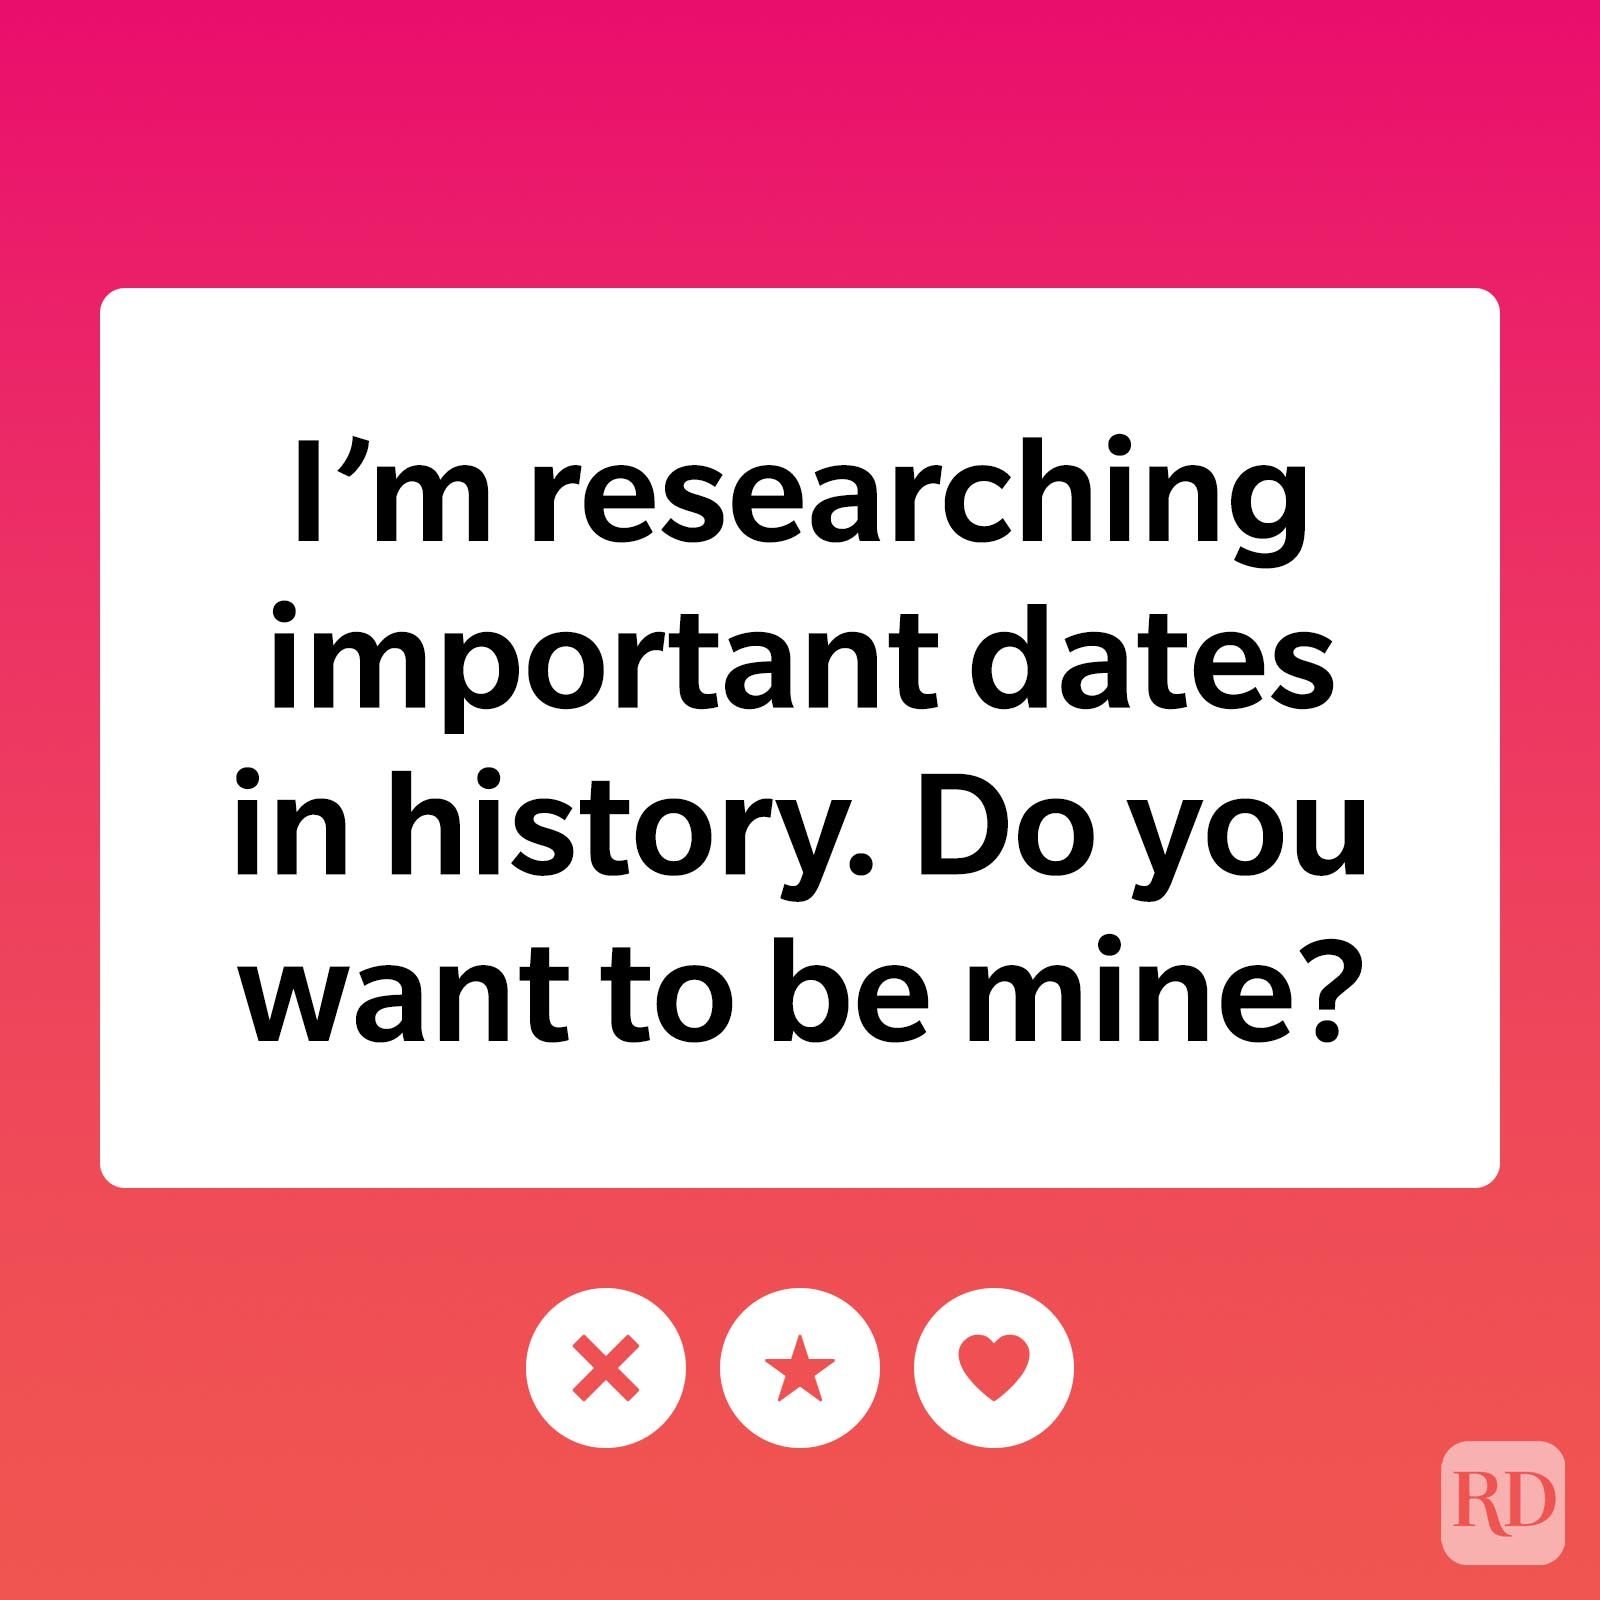 I'm researching important dates in history. Do you want to be mine?